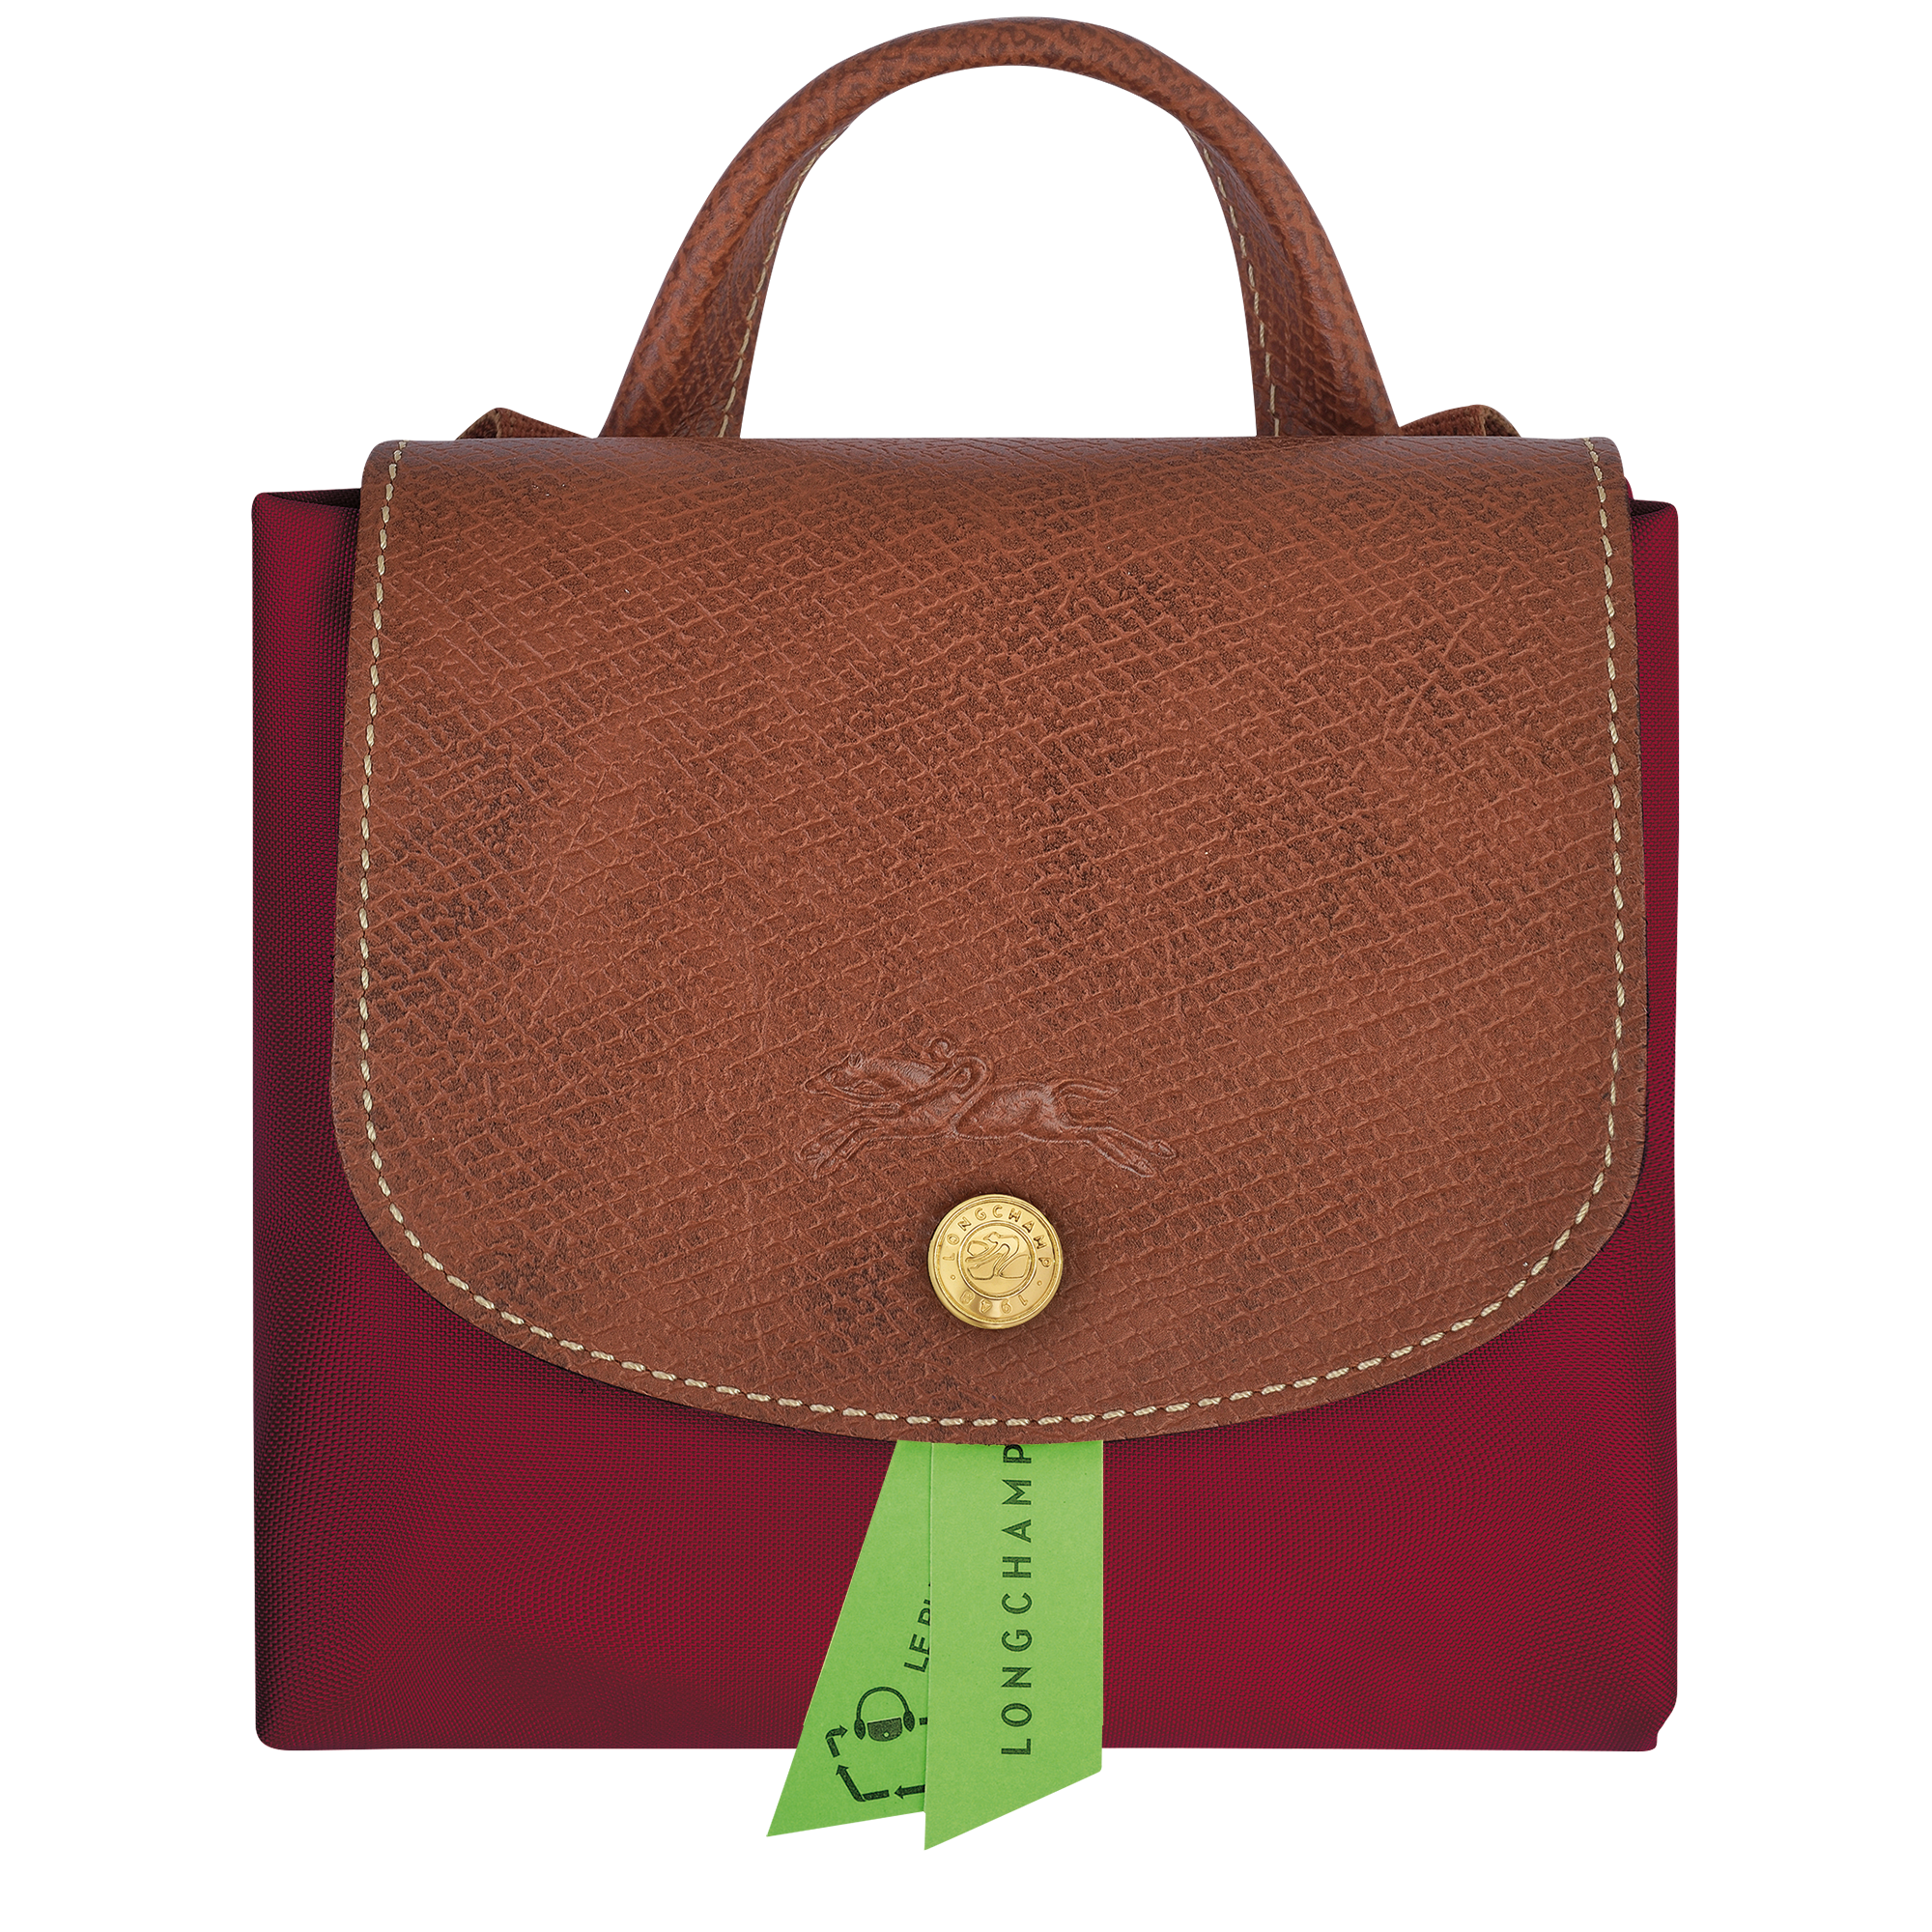 Longchamp LE PLIAGE ORIGINAL - Backpack in Red - 4 (SKU: L1699089P59)